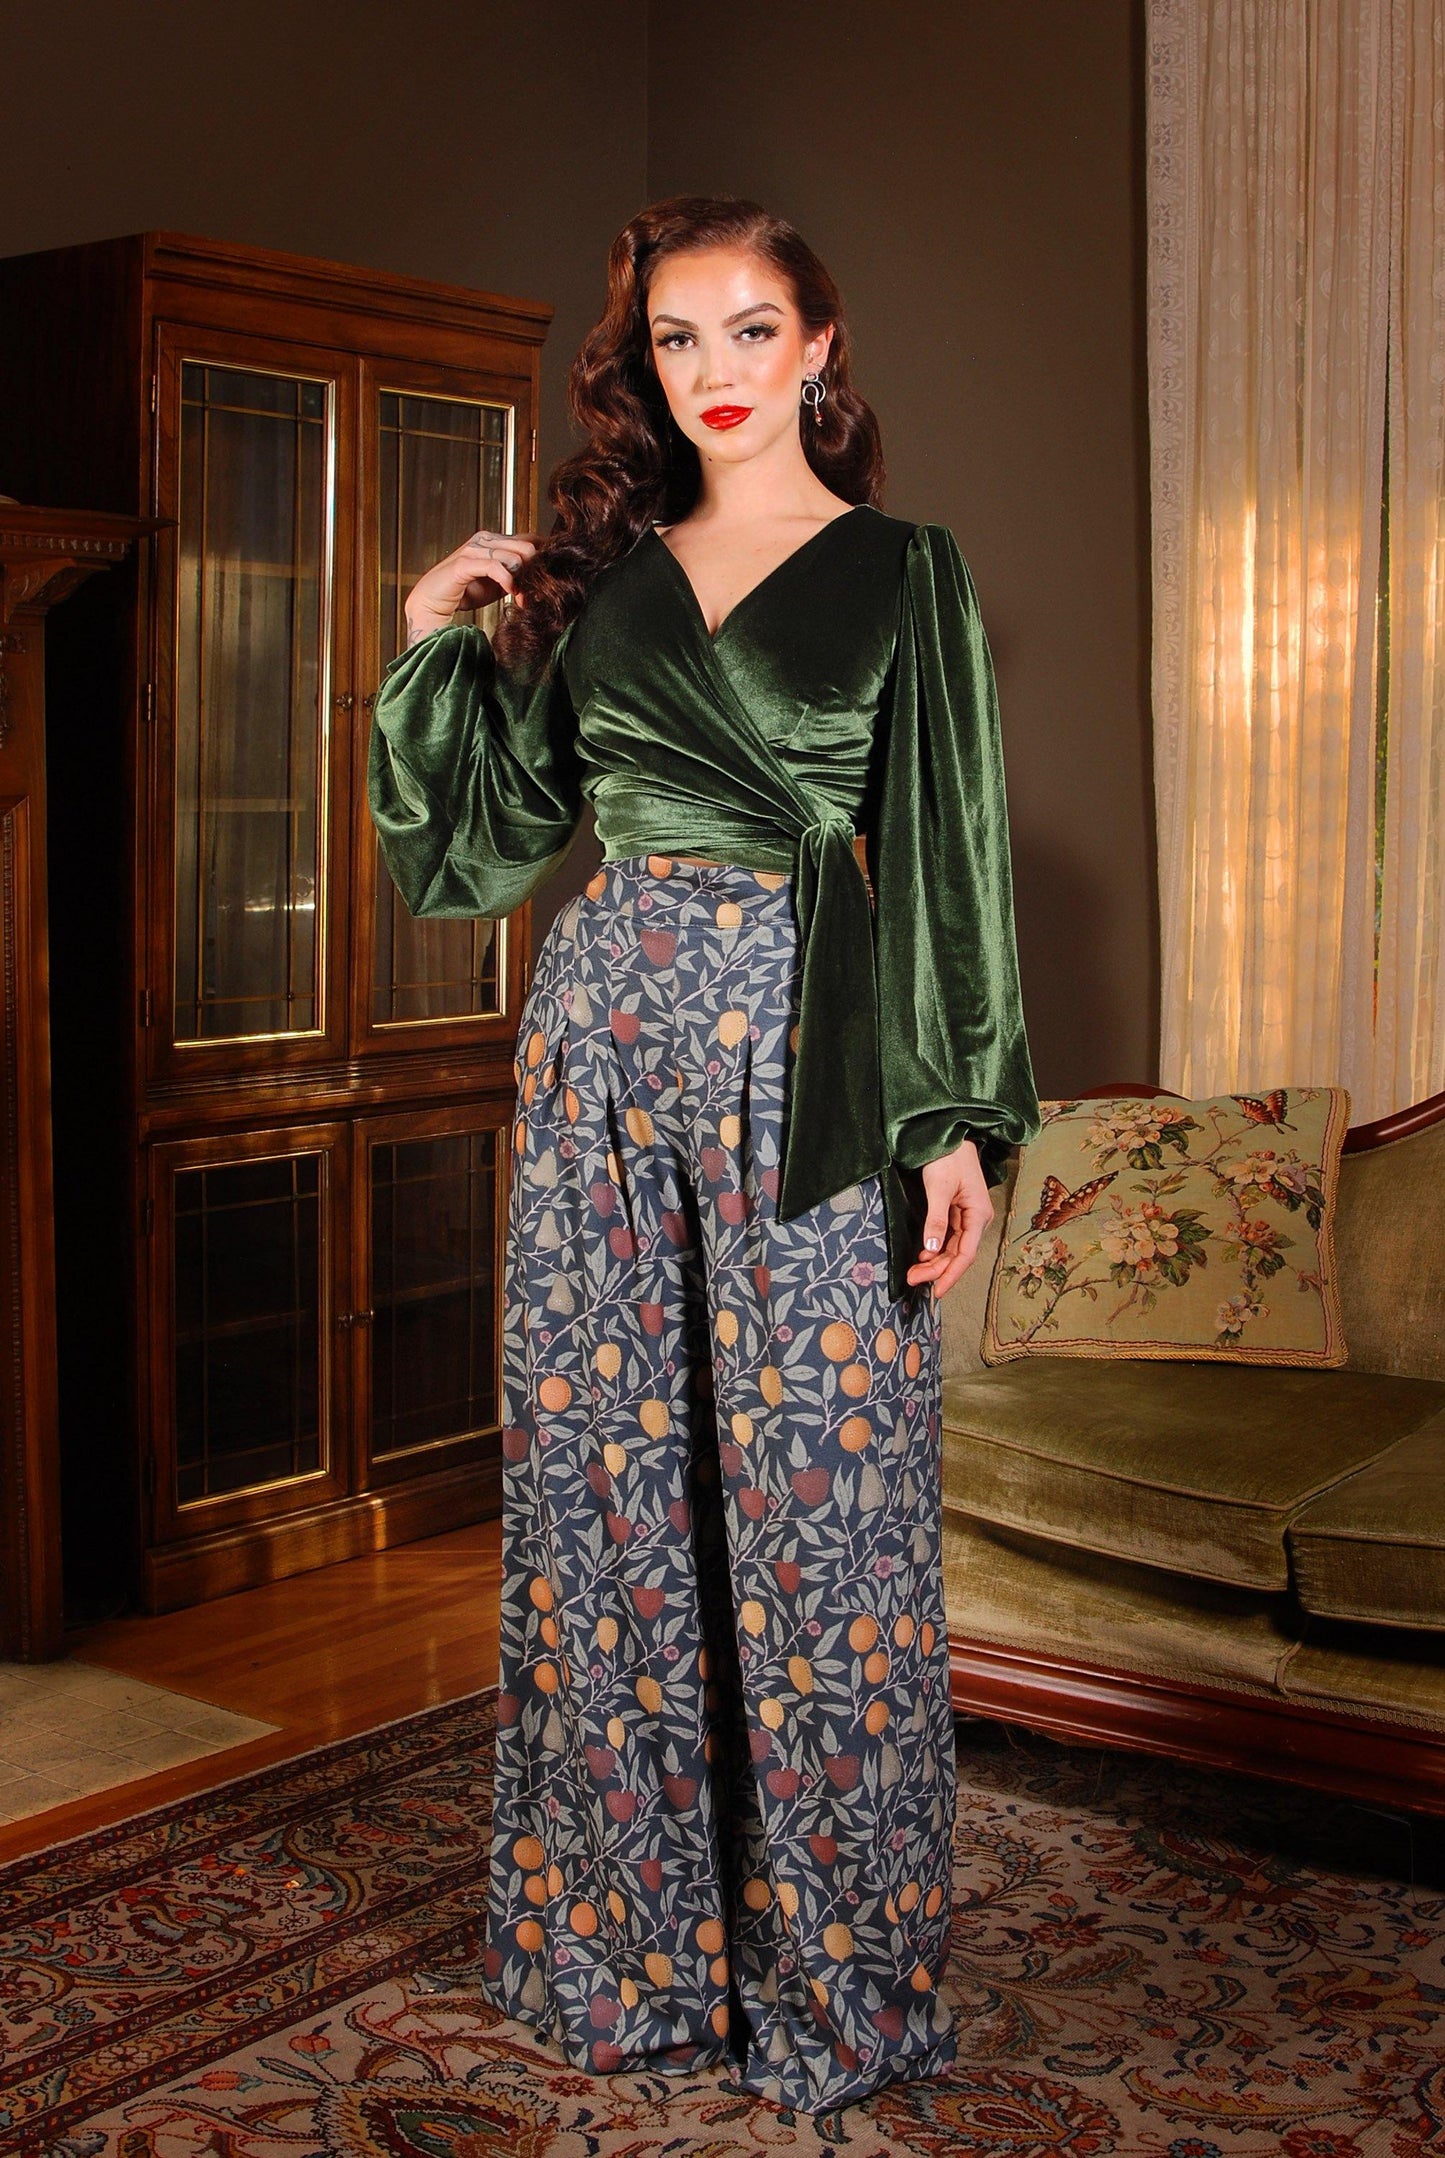 Pinup Girl Clothing models Cora Morgan and Seattle pose in the PUG favorite Dietrich vintage inspired wide leg palazzo pants with pockets made of high quality stretch crepe in the exclusive Laura Byrnes and Hope Morrison Night in Eden Fruit Print.